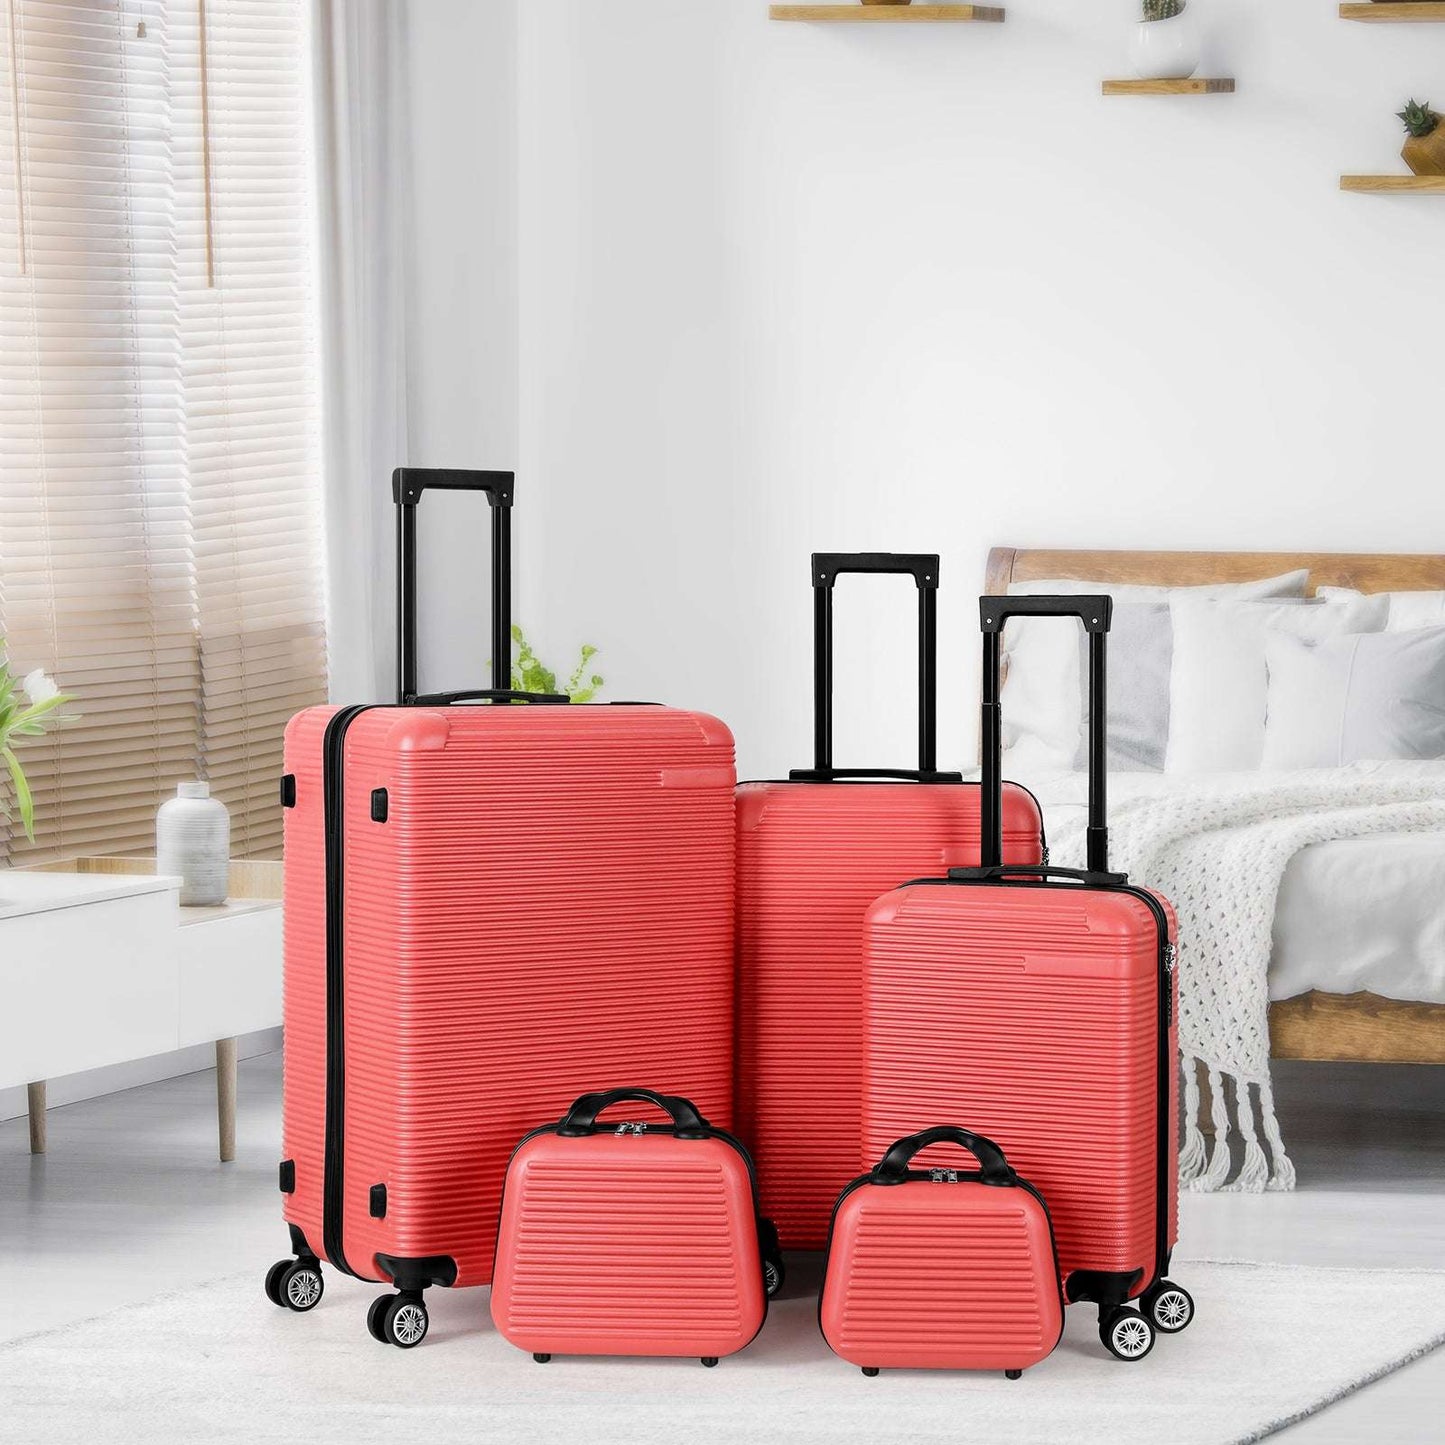 5-Piece ABS Luggage Set with TSA Lock, Includes 12",14",20", 24" & 28" 131 Luggage OK•PhotoFineArt OK•PhotoFineArt